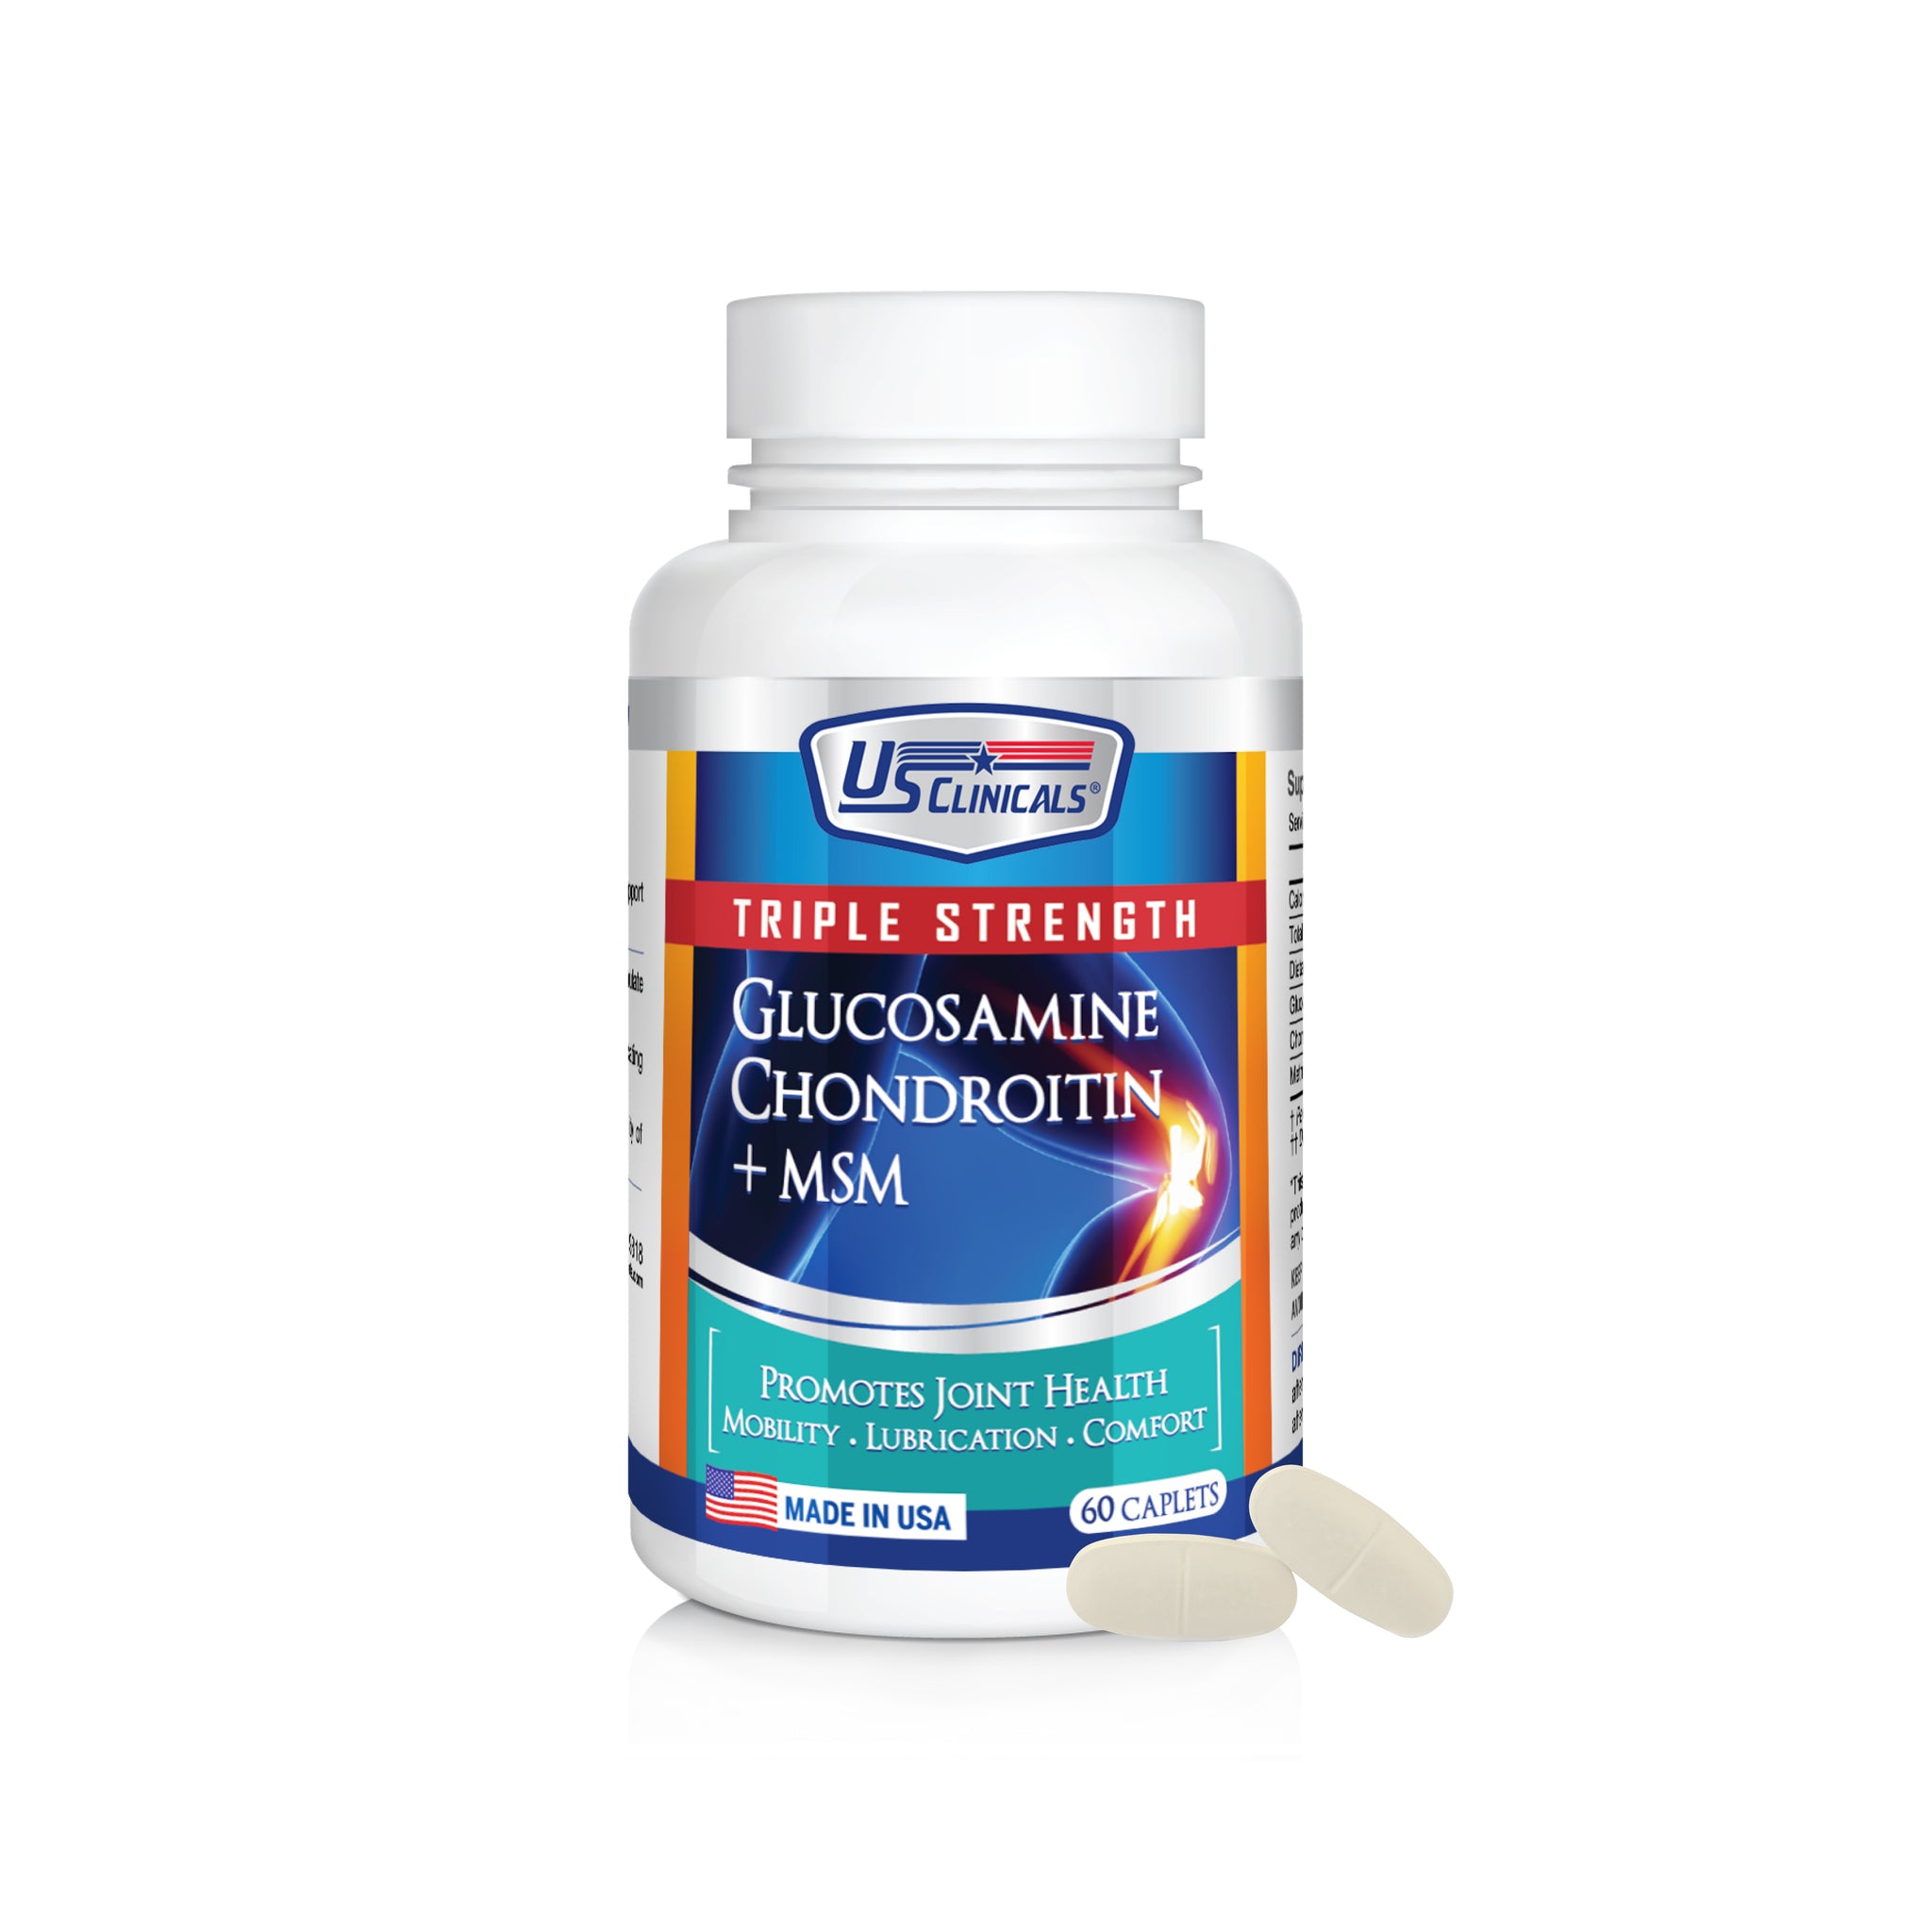 US Clinicals® Triple Strength Glucosamine Chondroitin + MSM.